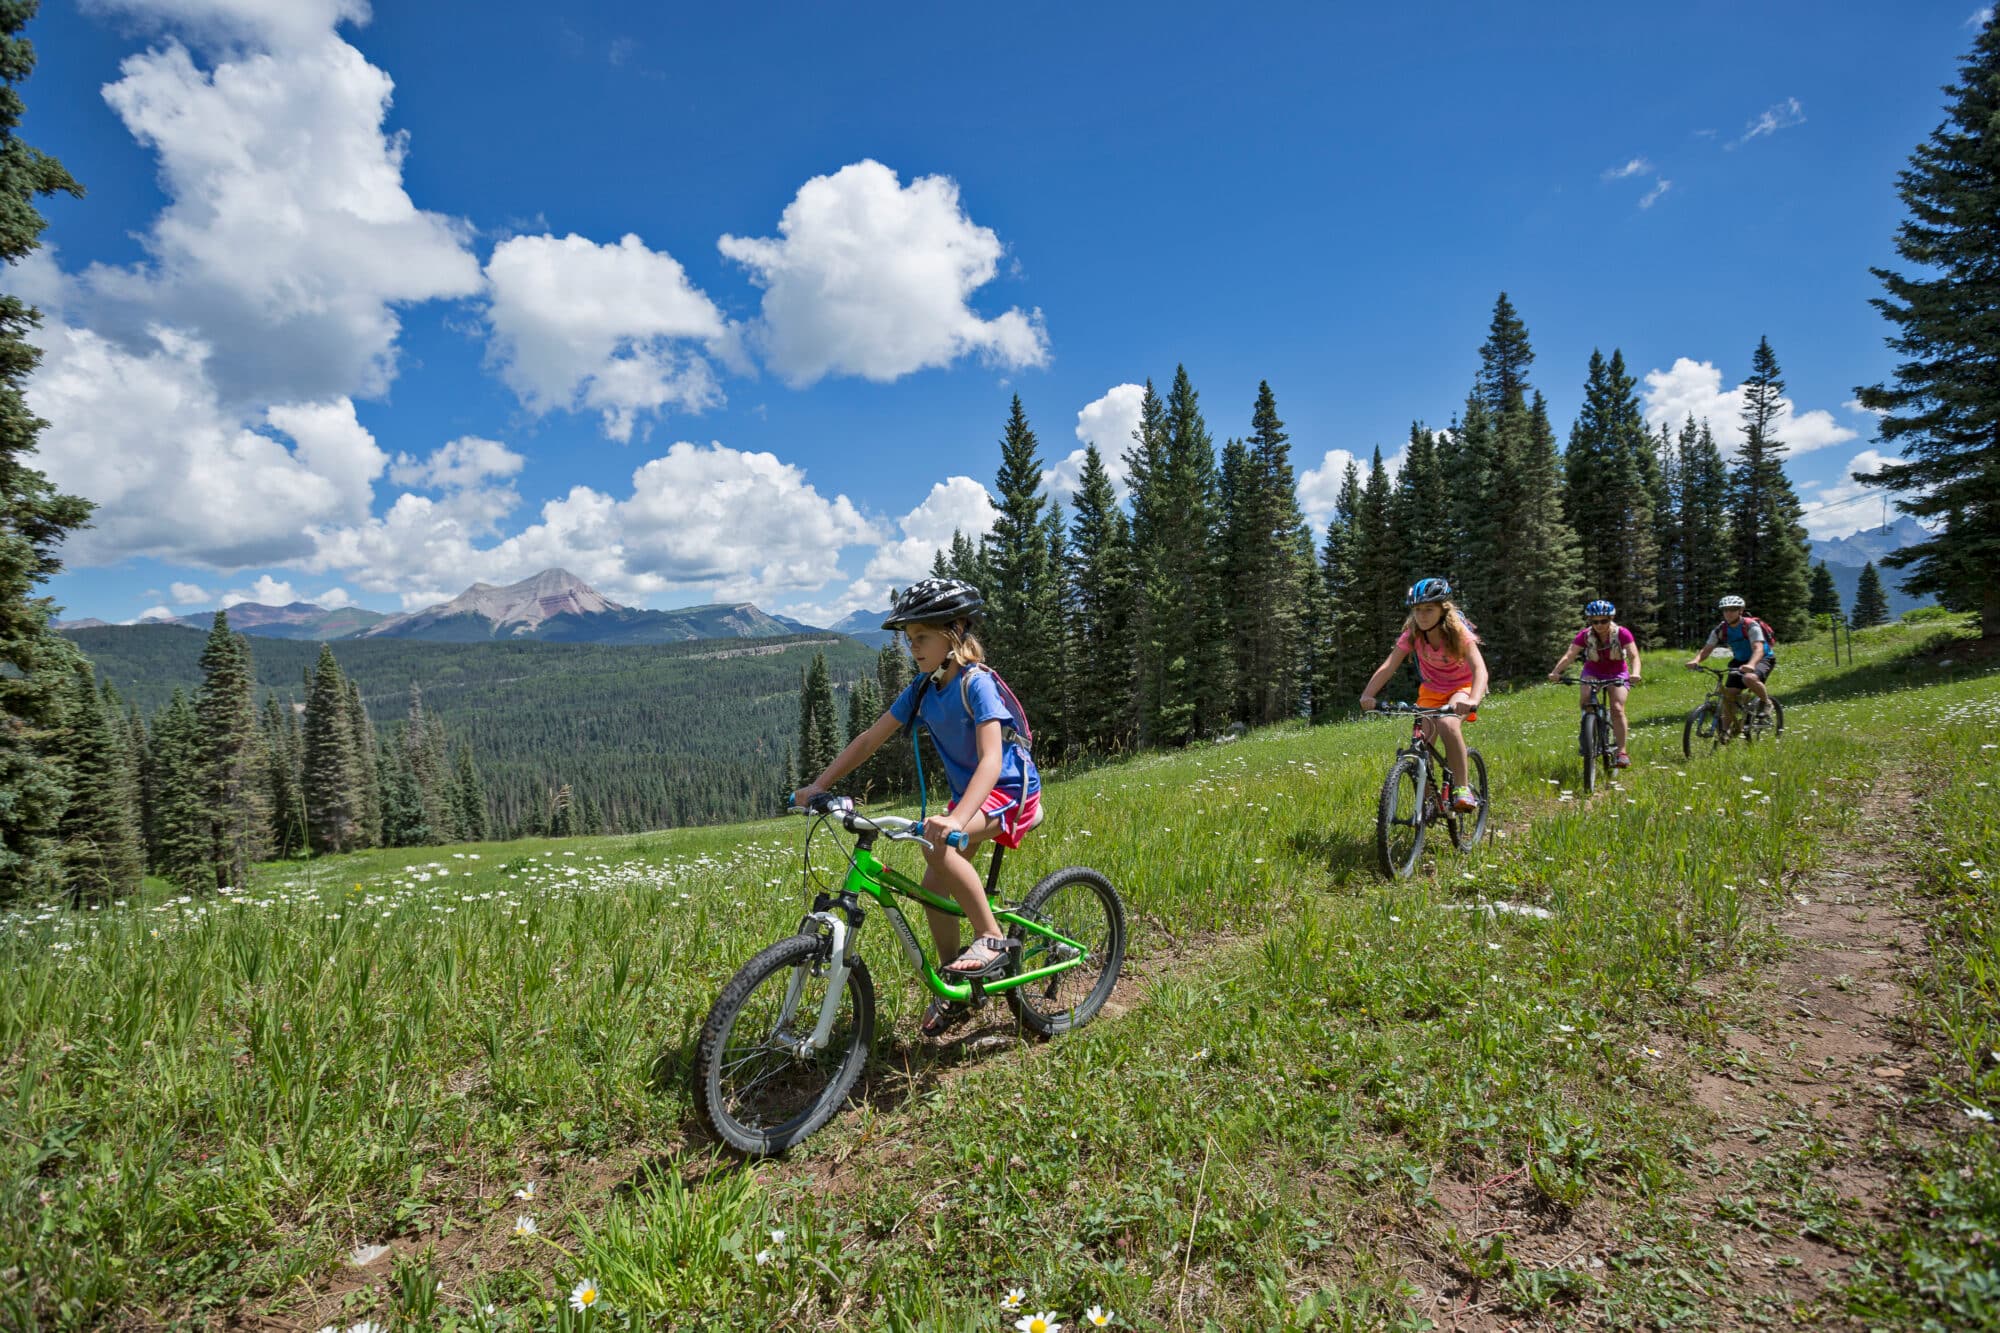 Family with young girls rides mountain bikes at Purgatory Resort